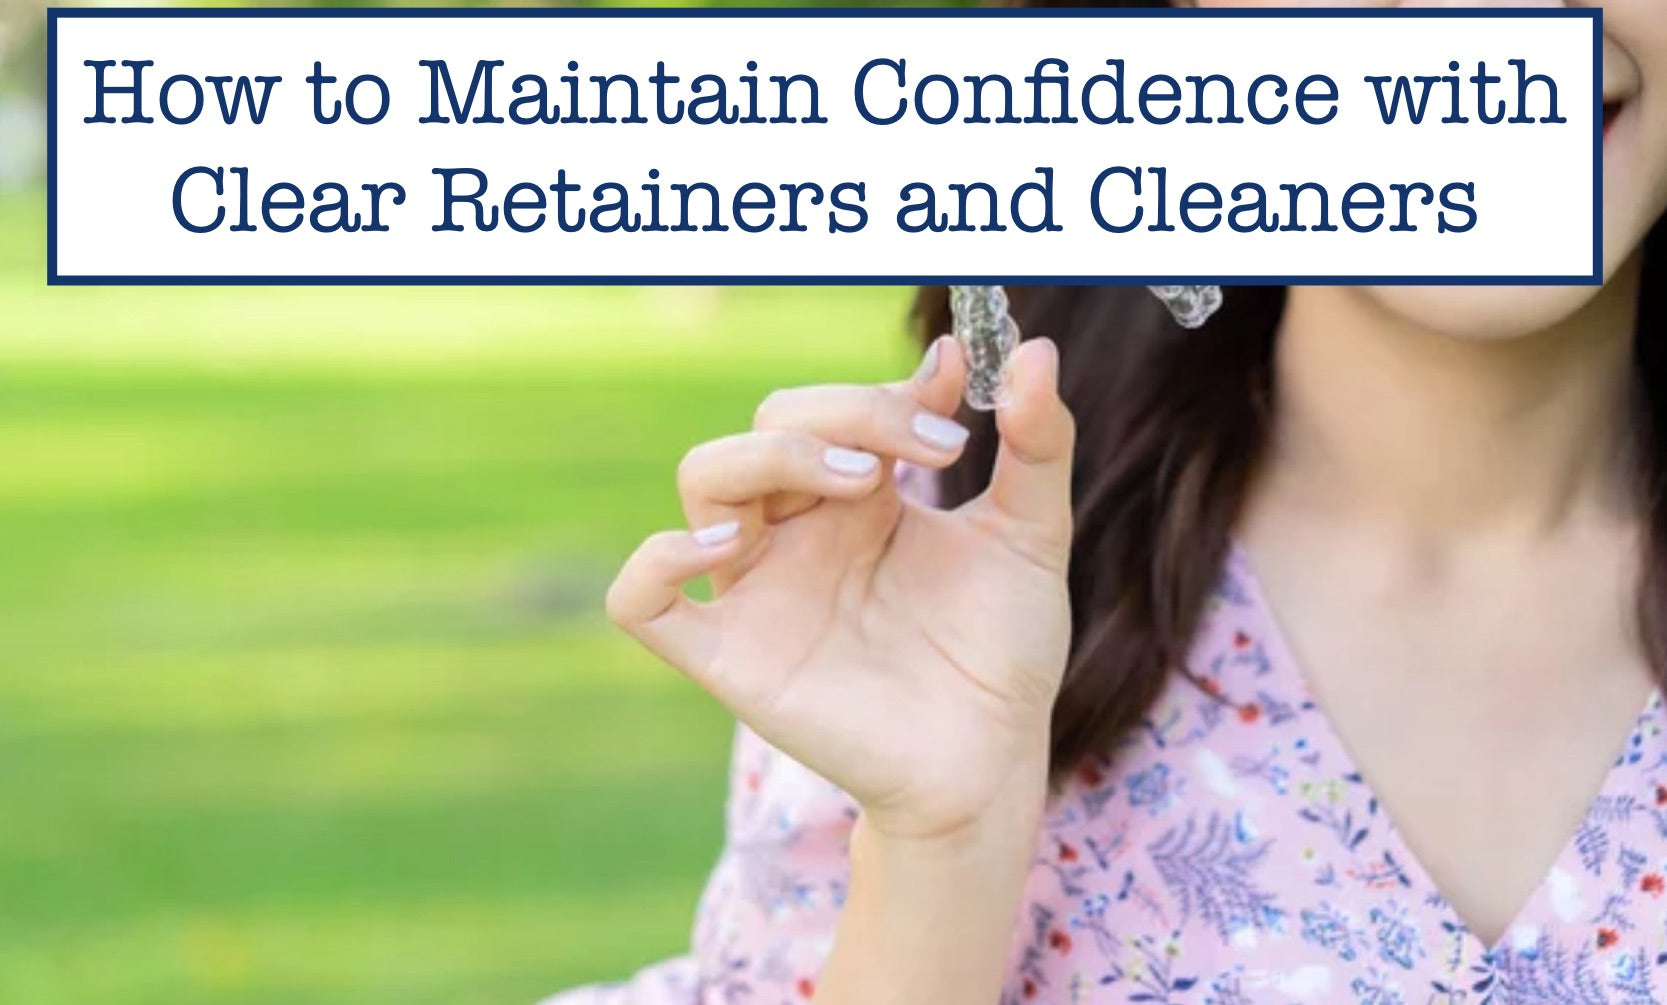 How to Maintain Confidence with Clear Retainers and Cleaners